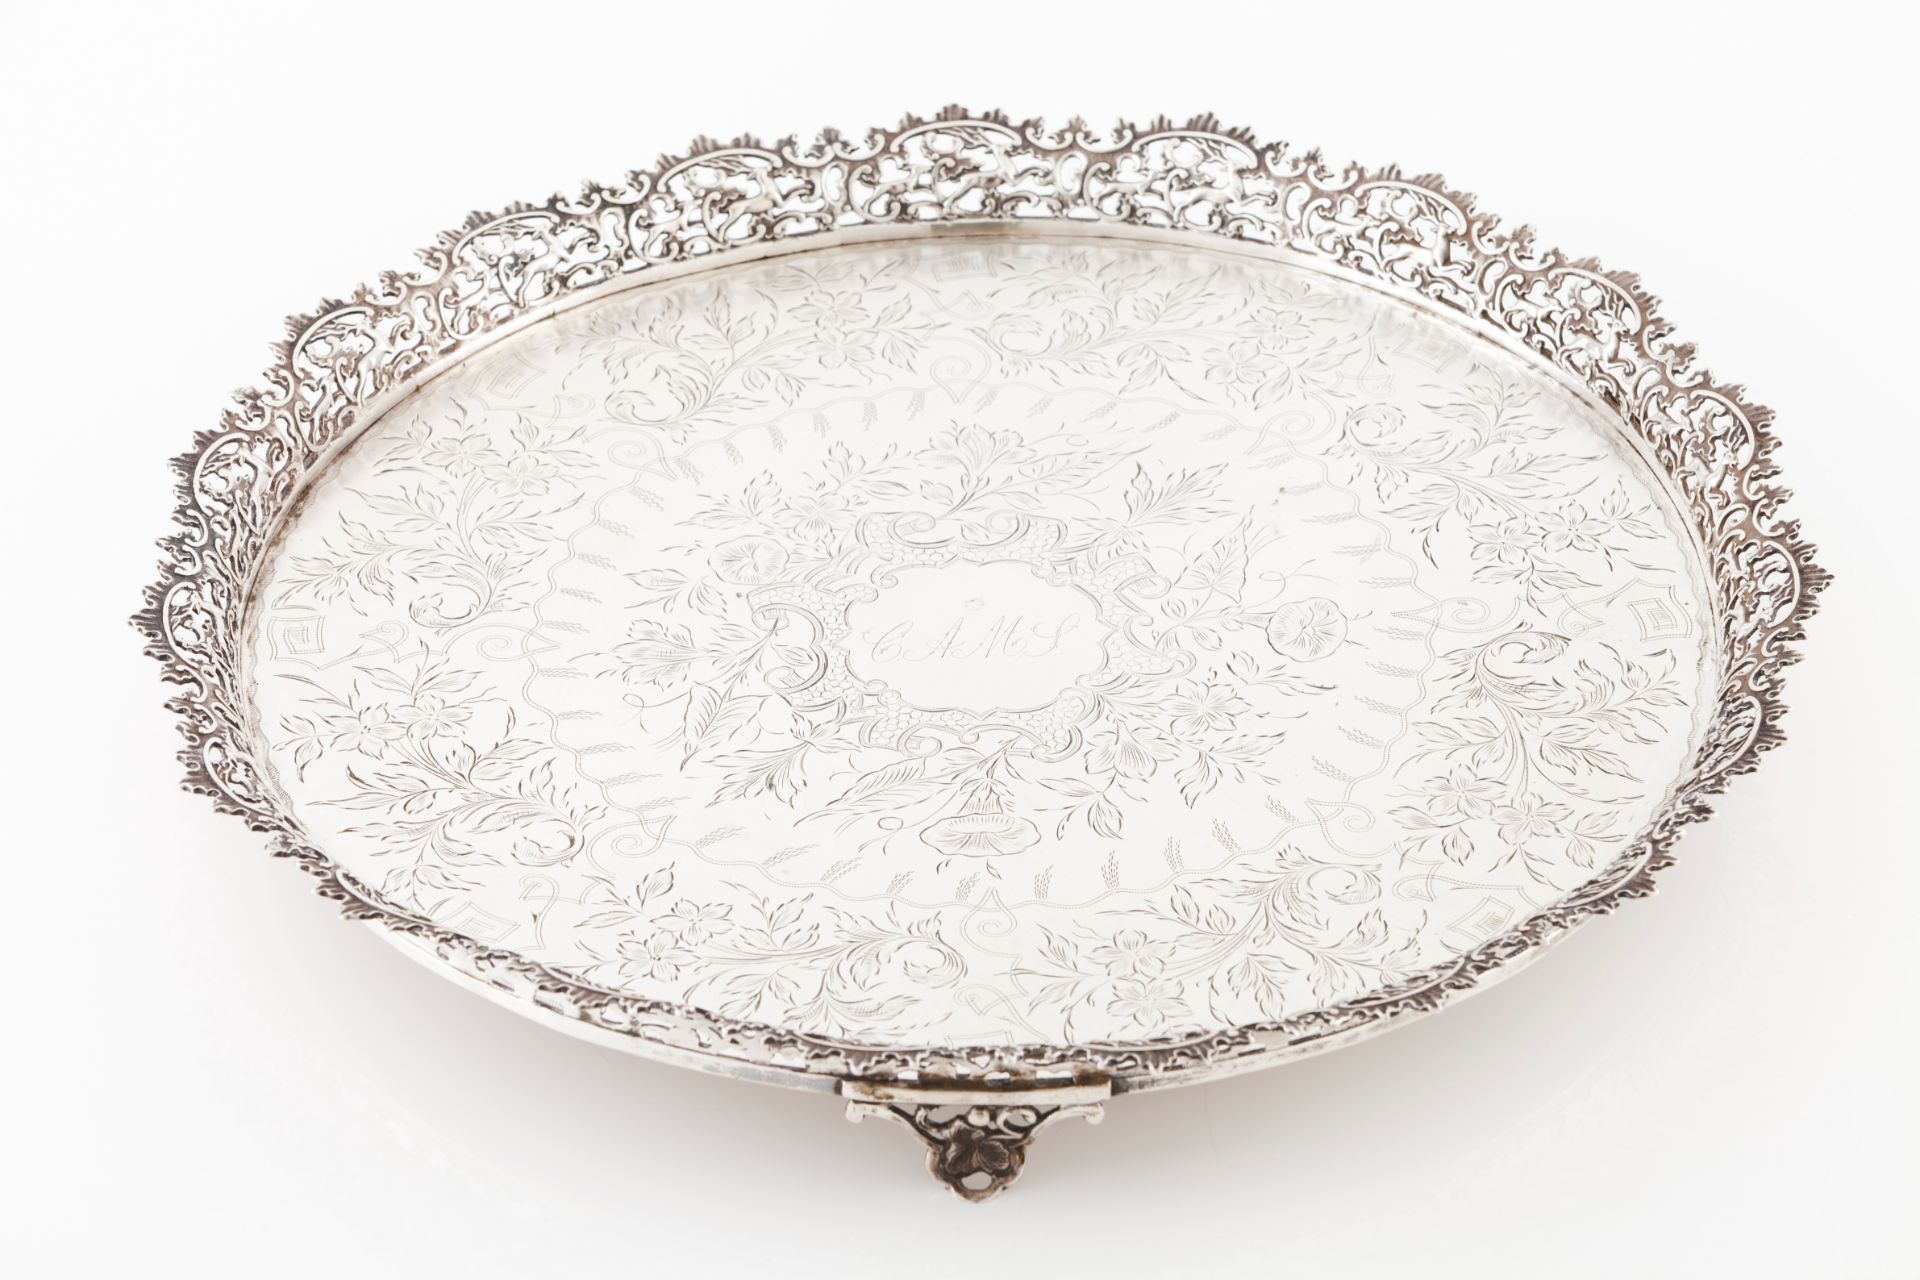 A salverPortuguese silver Engraved and chiselled centre of profuse foliage inspired decoration and